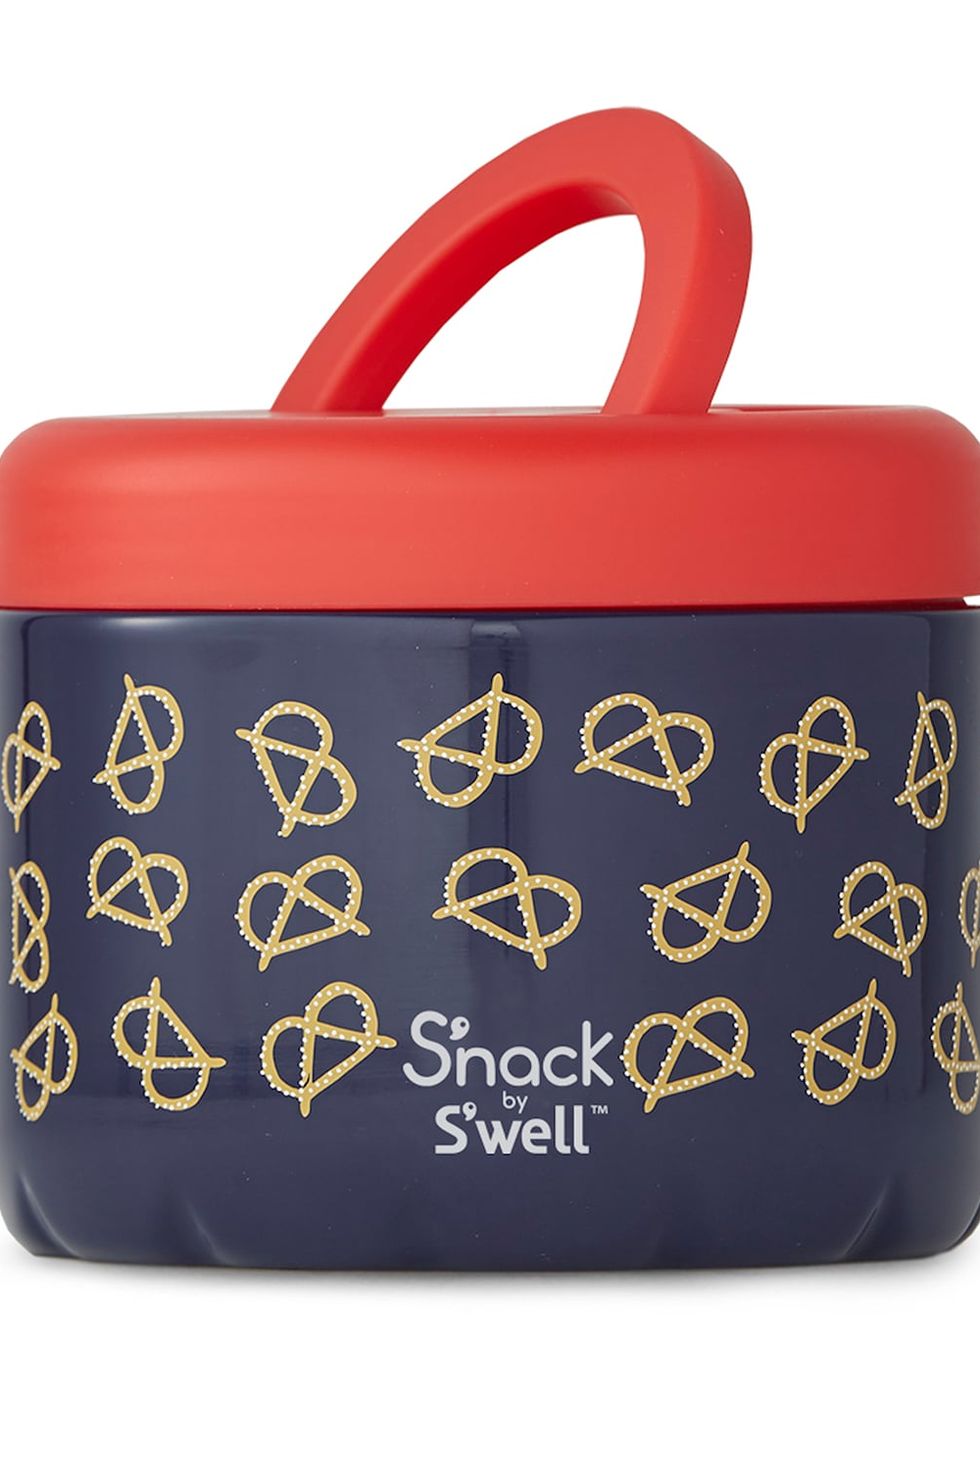 New S'well S'nack containers just made lunch time more S'tylish.